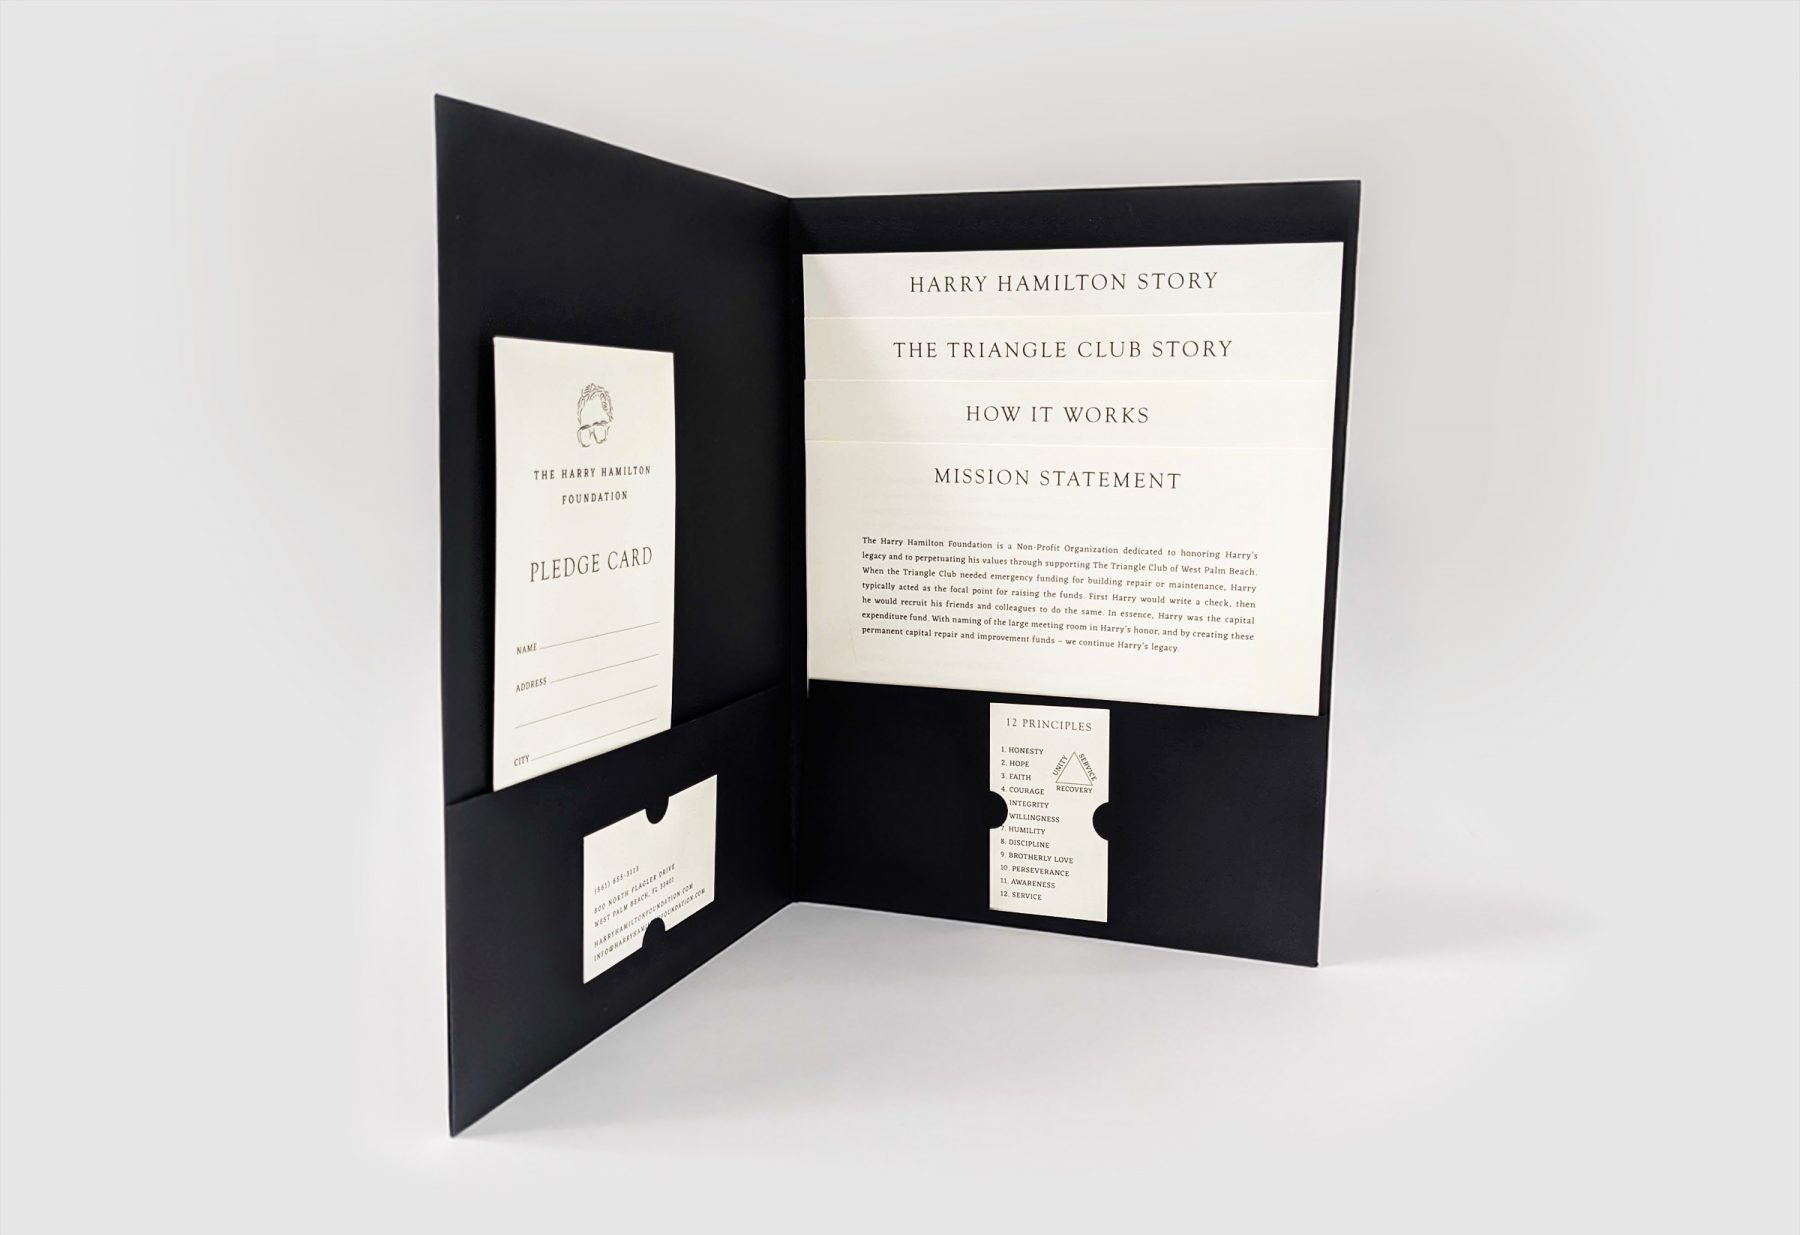 Print collateral for West Palm Beach nonprofit group the Harry Hamilton Foundation presented in a black folder with branded letterhead, business cards, and forms inside.